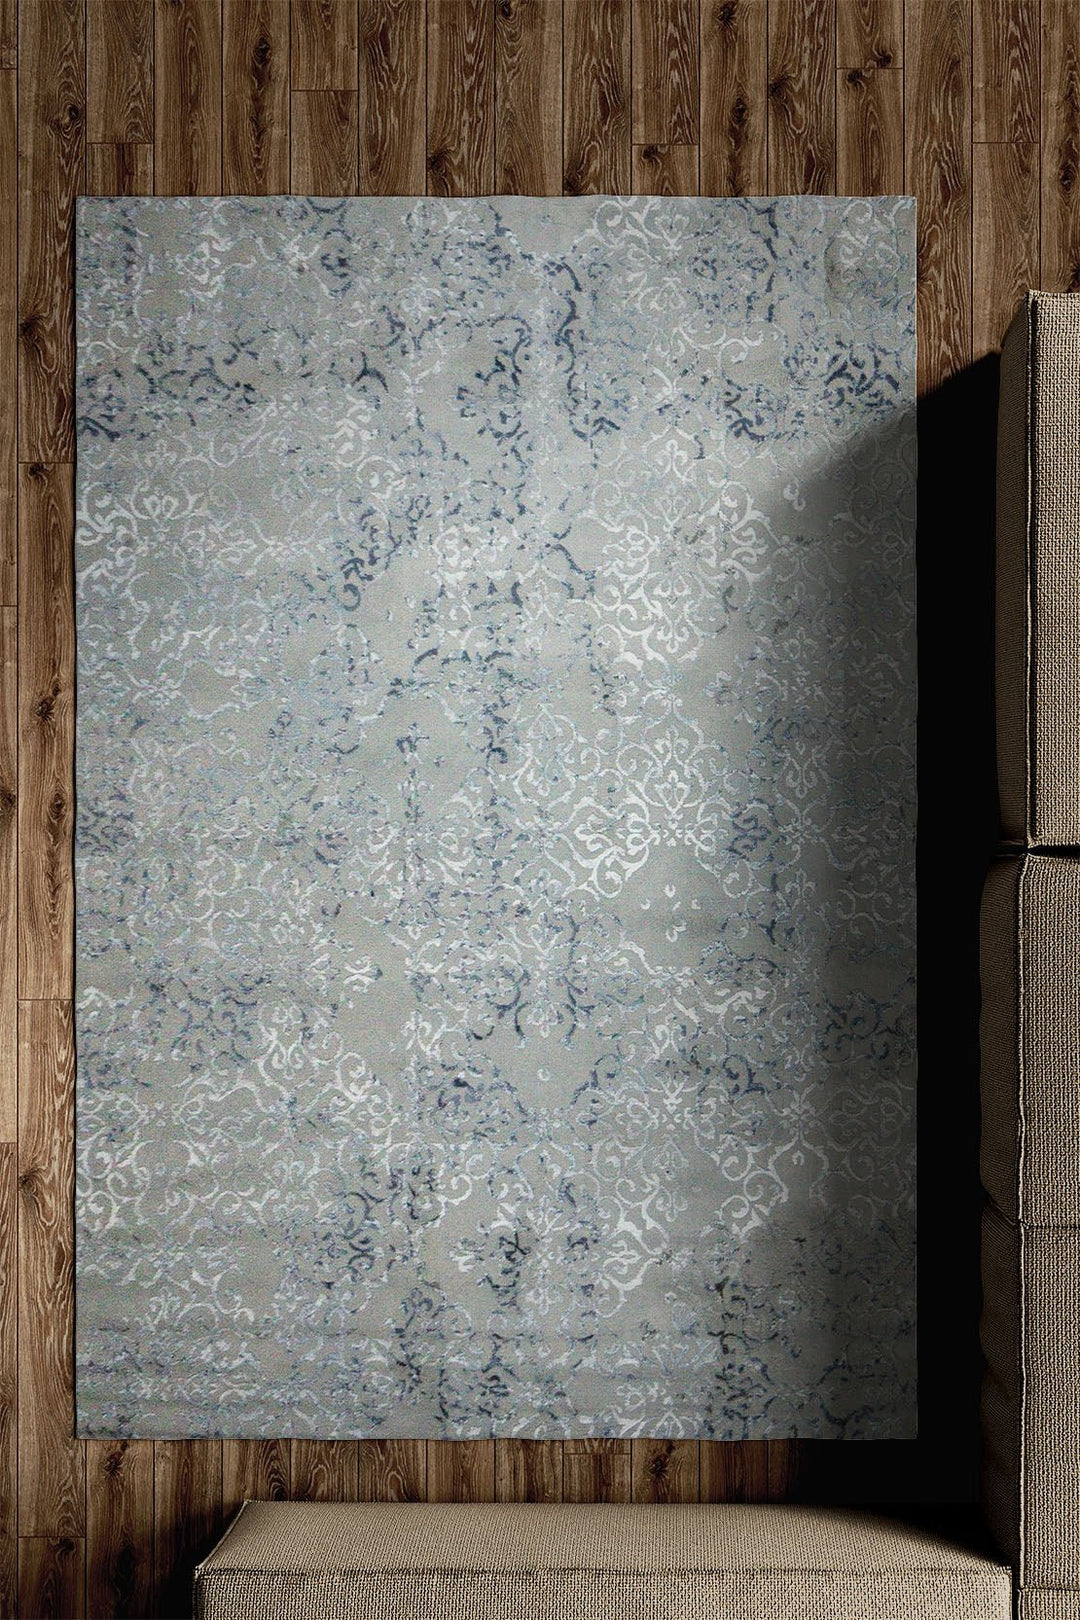 Turkish Modern Festival WD Rug - 6.6 x 9.5 FT - Gray & Blue - Sleek and Minimalist for Chic Interiors - V Surfaces